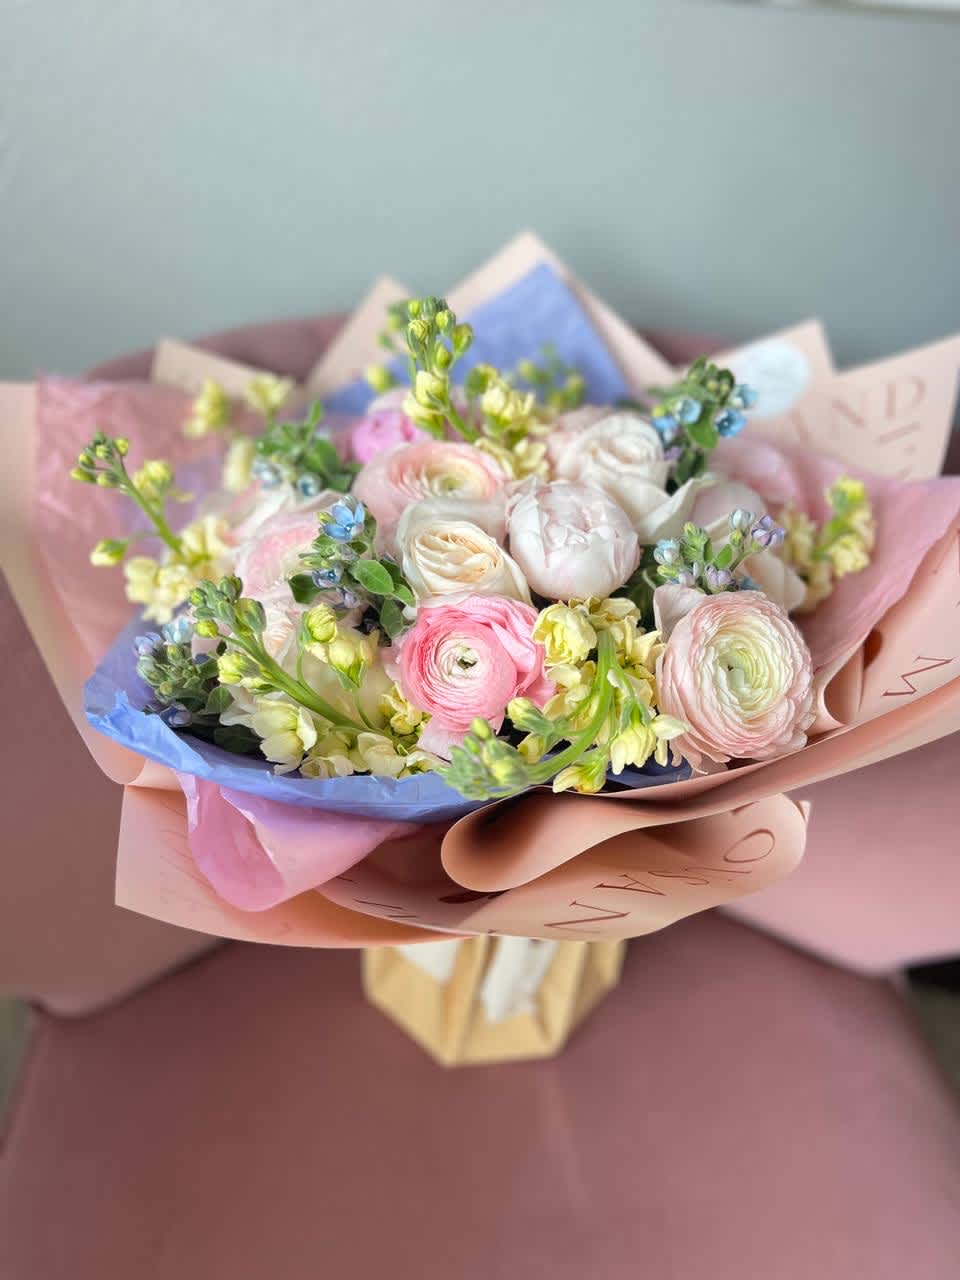 Description: Bask in the enchanting beaty of our Spring mood bouquet, an